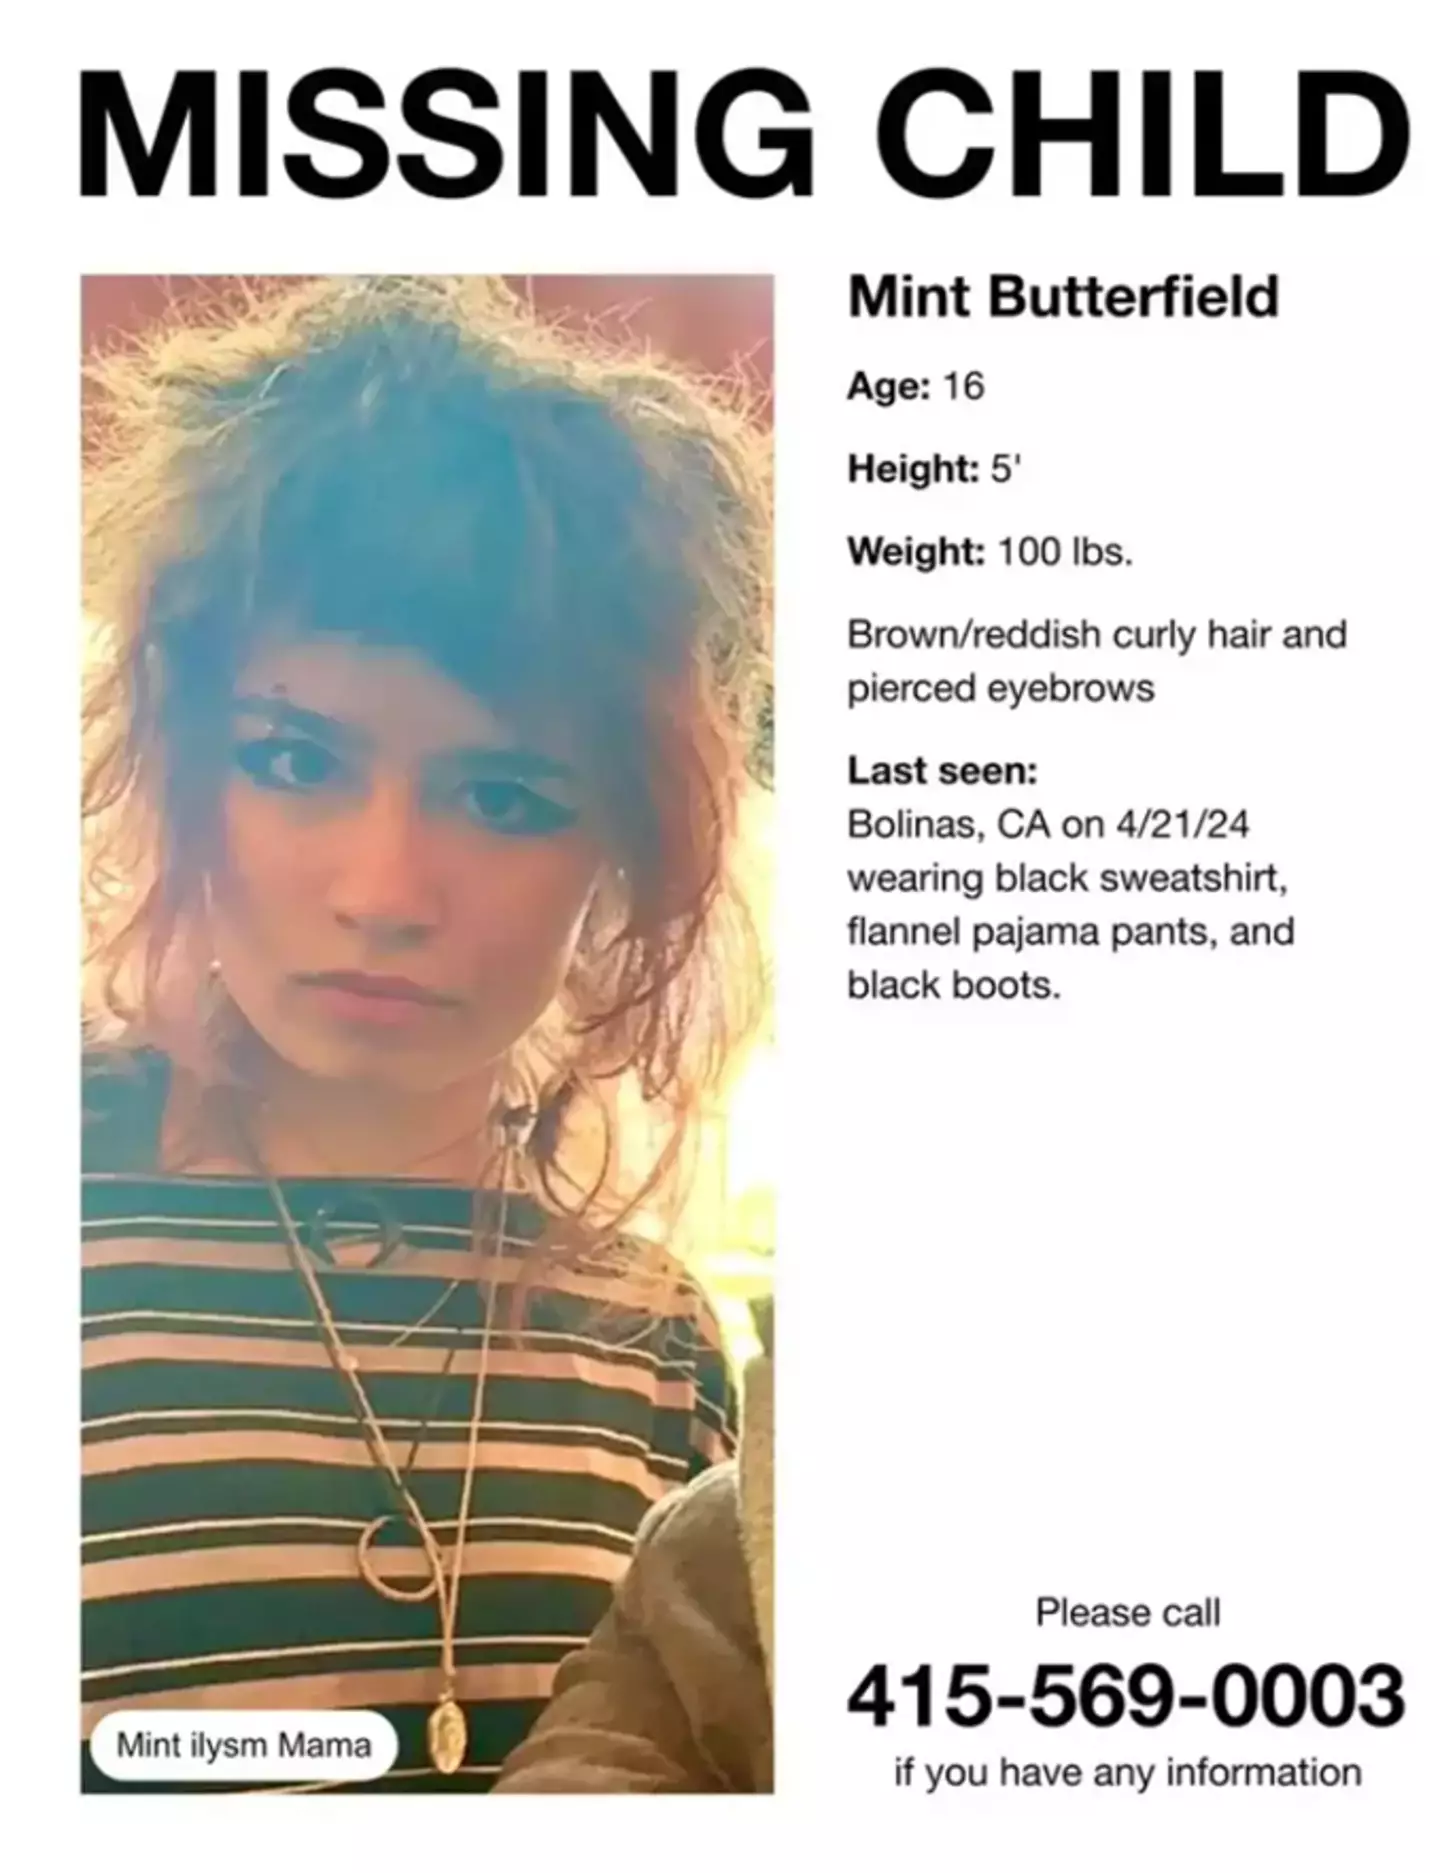 Police have issued an update on the missing teen. (Marin County Sheriff's Office)